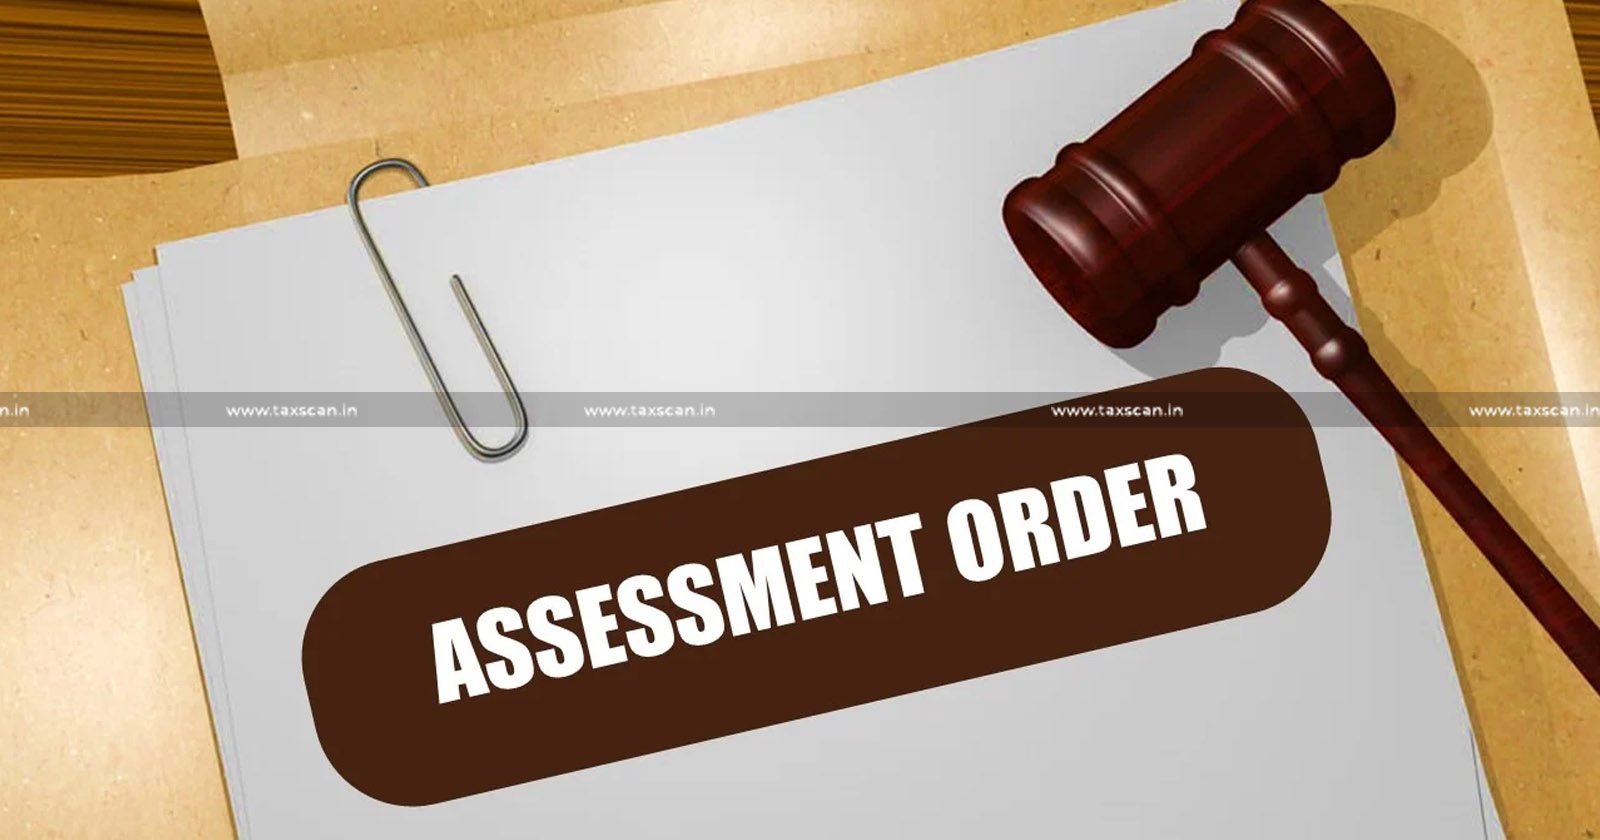 Kerala High Court - Income Tax - Assessment Order - Income Tax Assessment Order - TAXSCAN